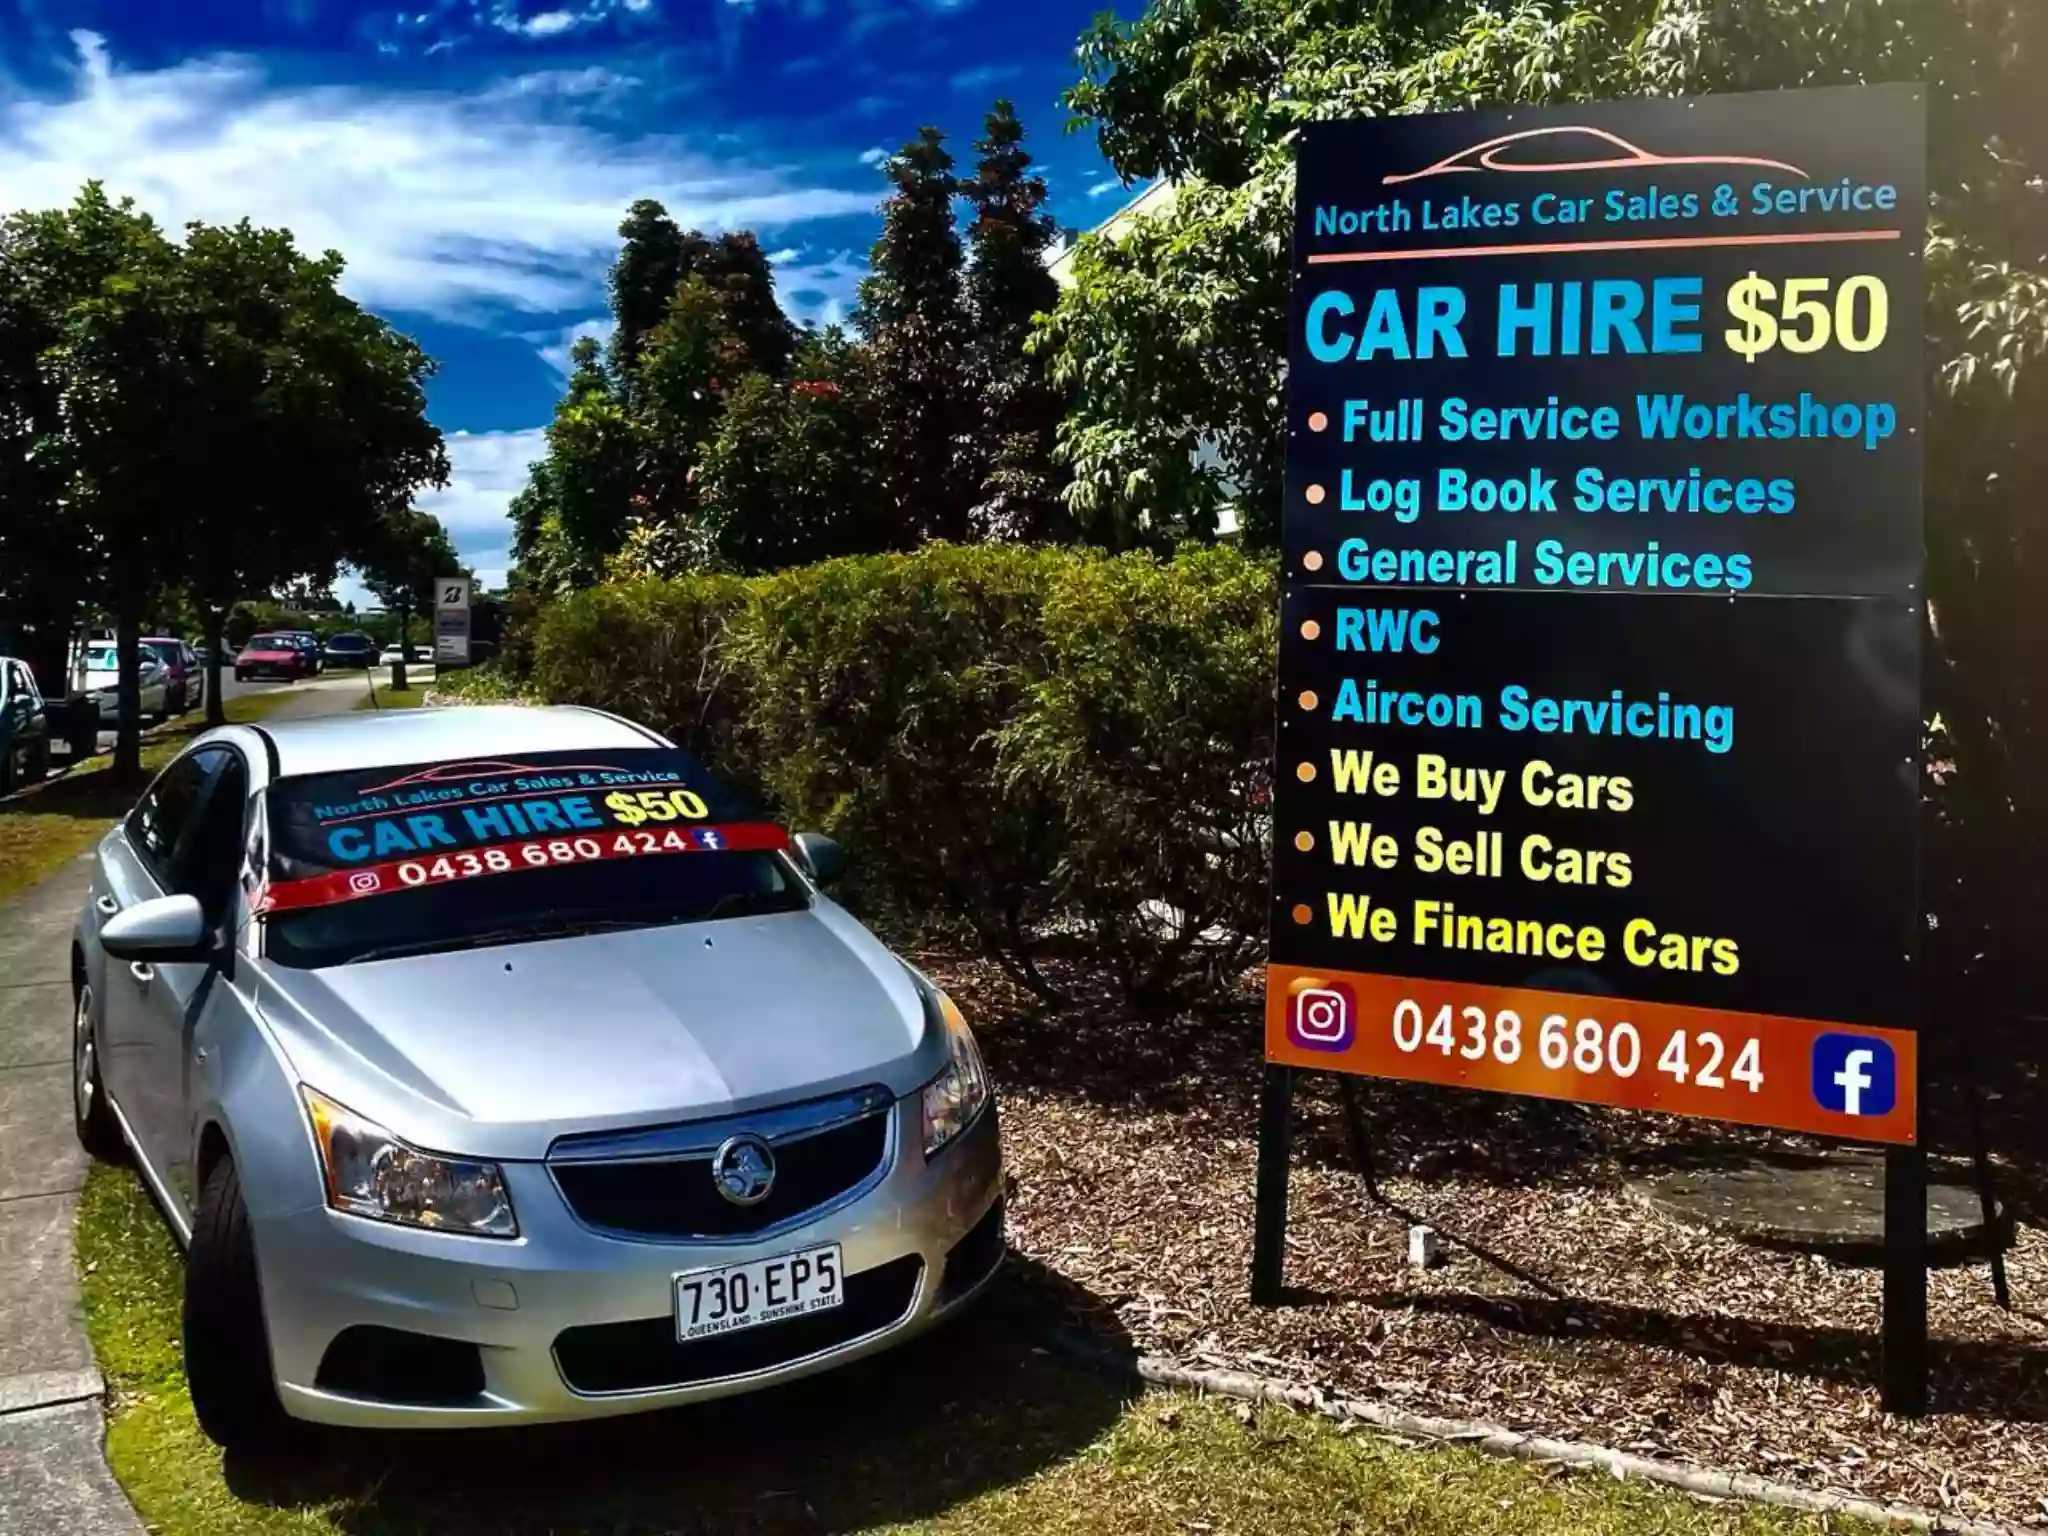 Northlakes Car Sales, Service, Hire, Air Con, Cash For Cars, Low Car Towing RWC, Brakes, Tyres, Arrive Drive Racecar Hire